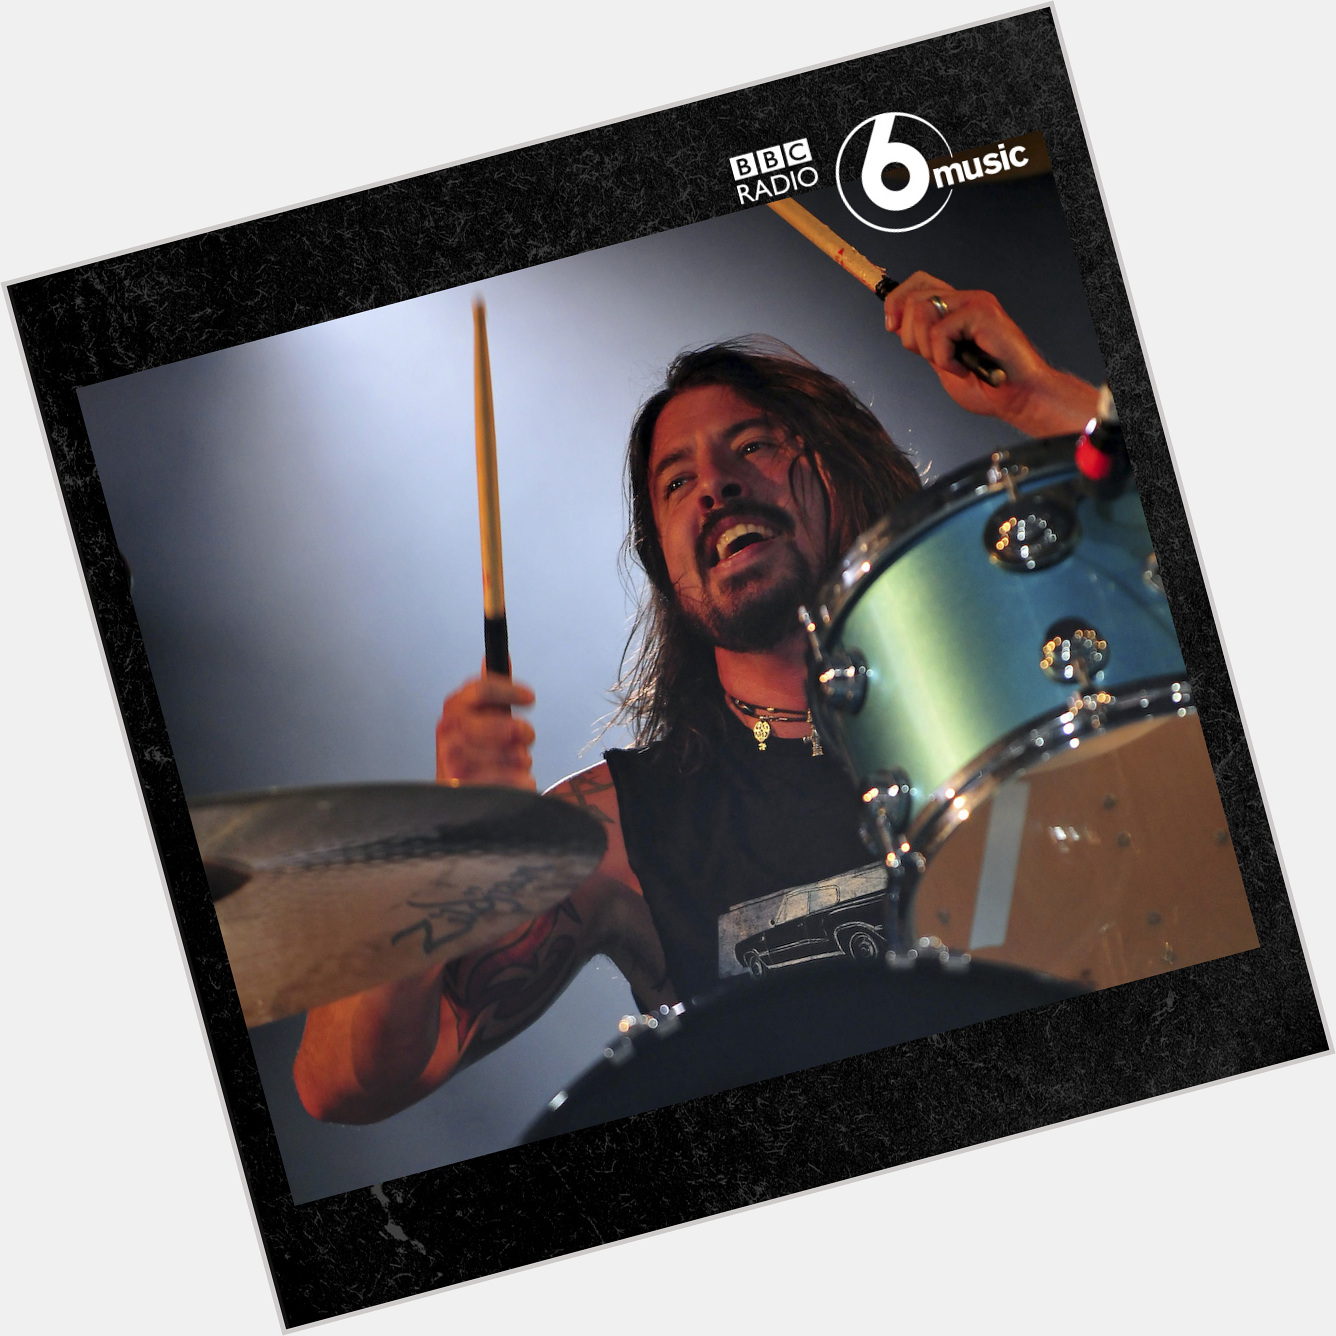 Happy Birthday Dave Grohl What\s your favourite track from his back catalogue? 